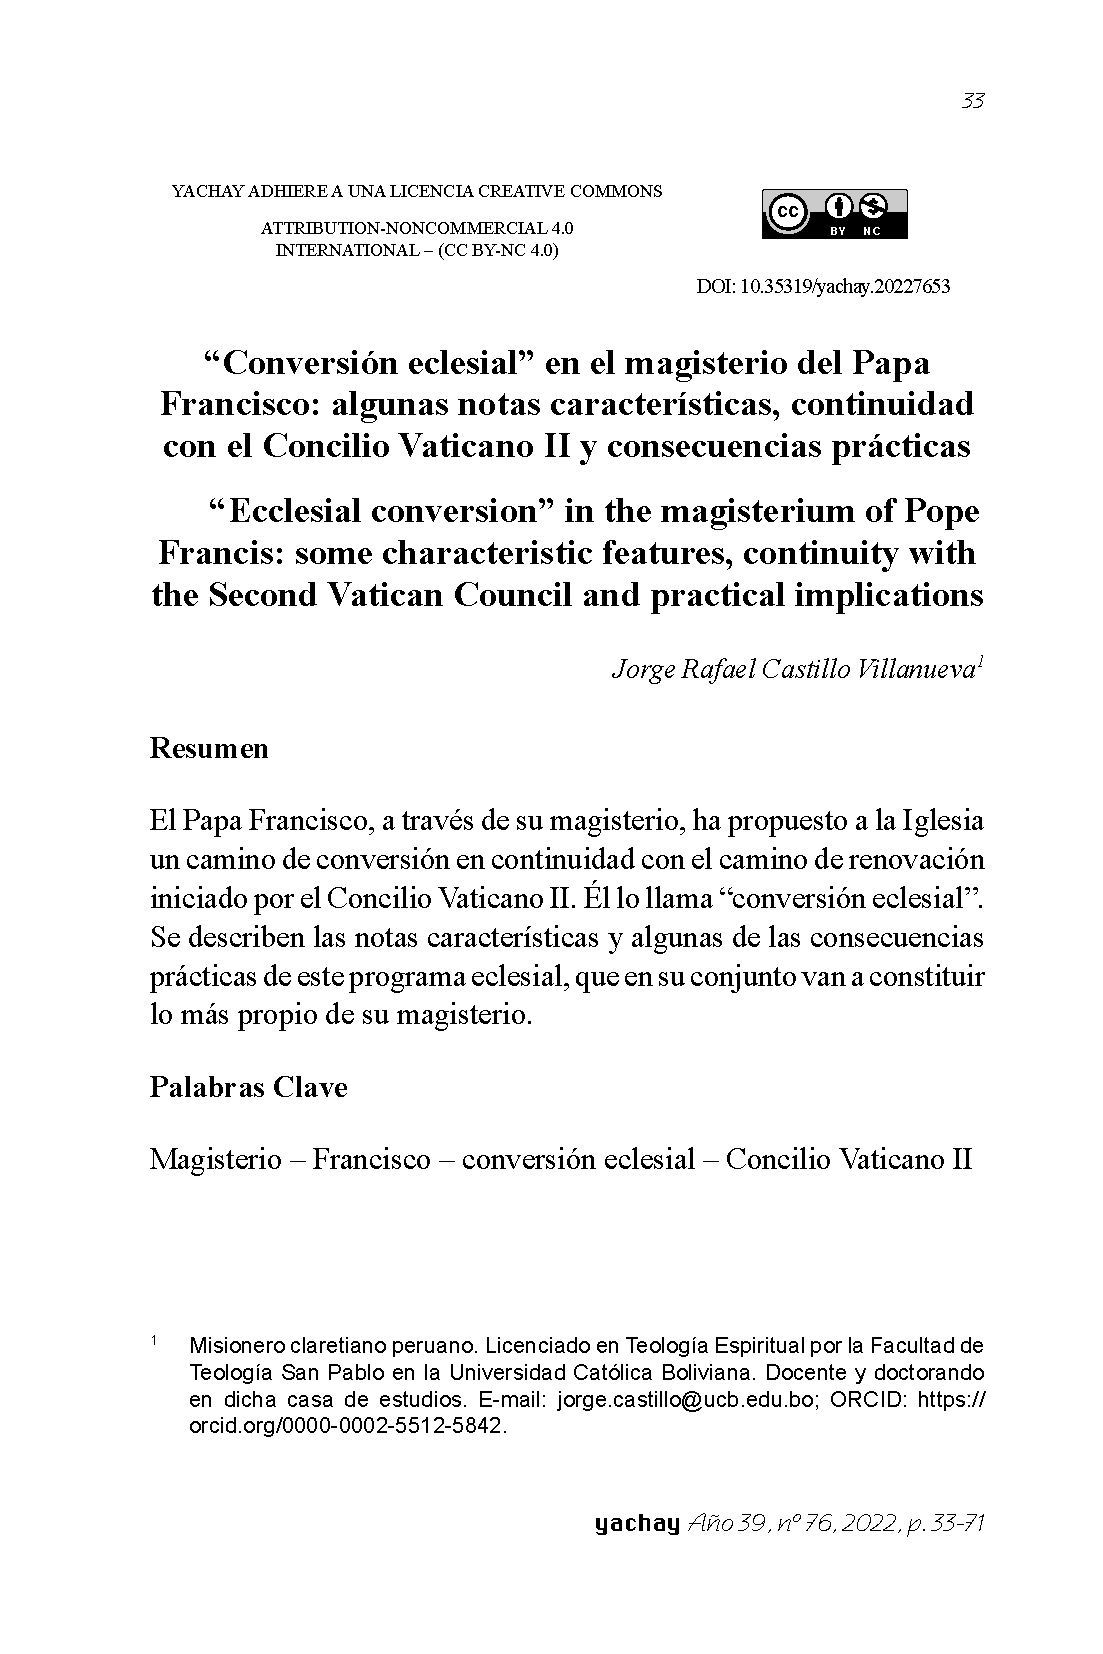 “Ecclesial conversion” in the magisterium of Pope Francis: some characteristic features, continuity with the Second Vatican Council and practical implications